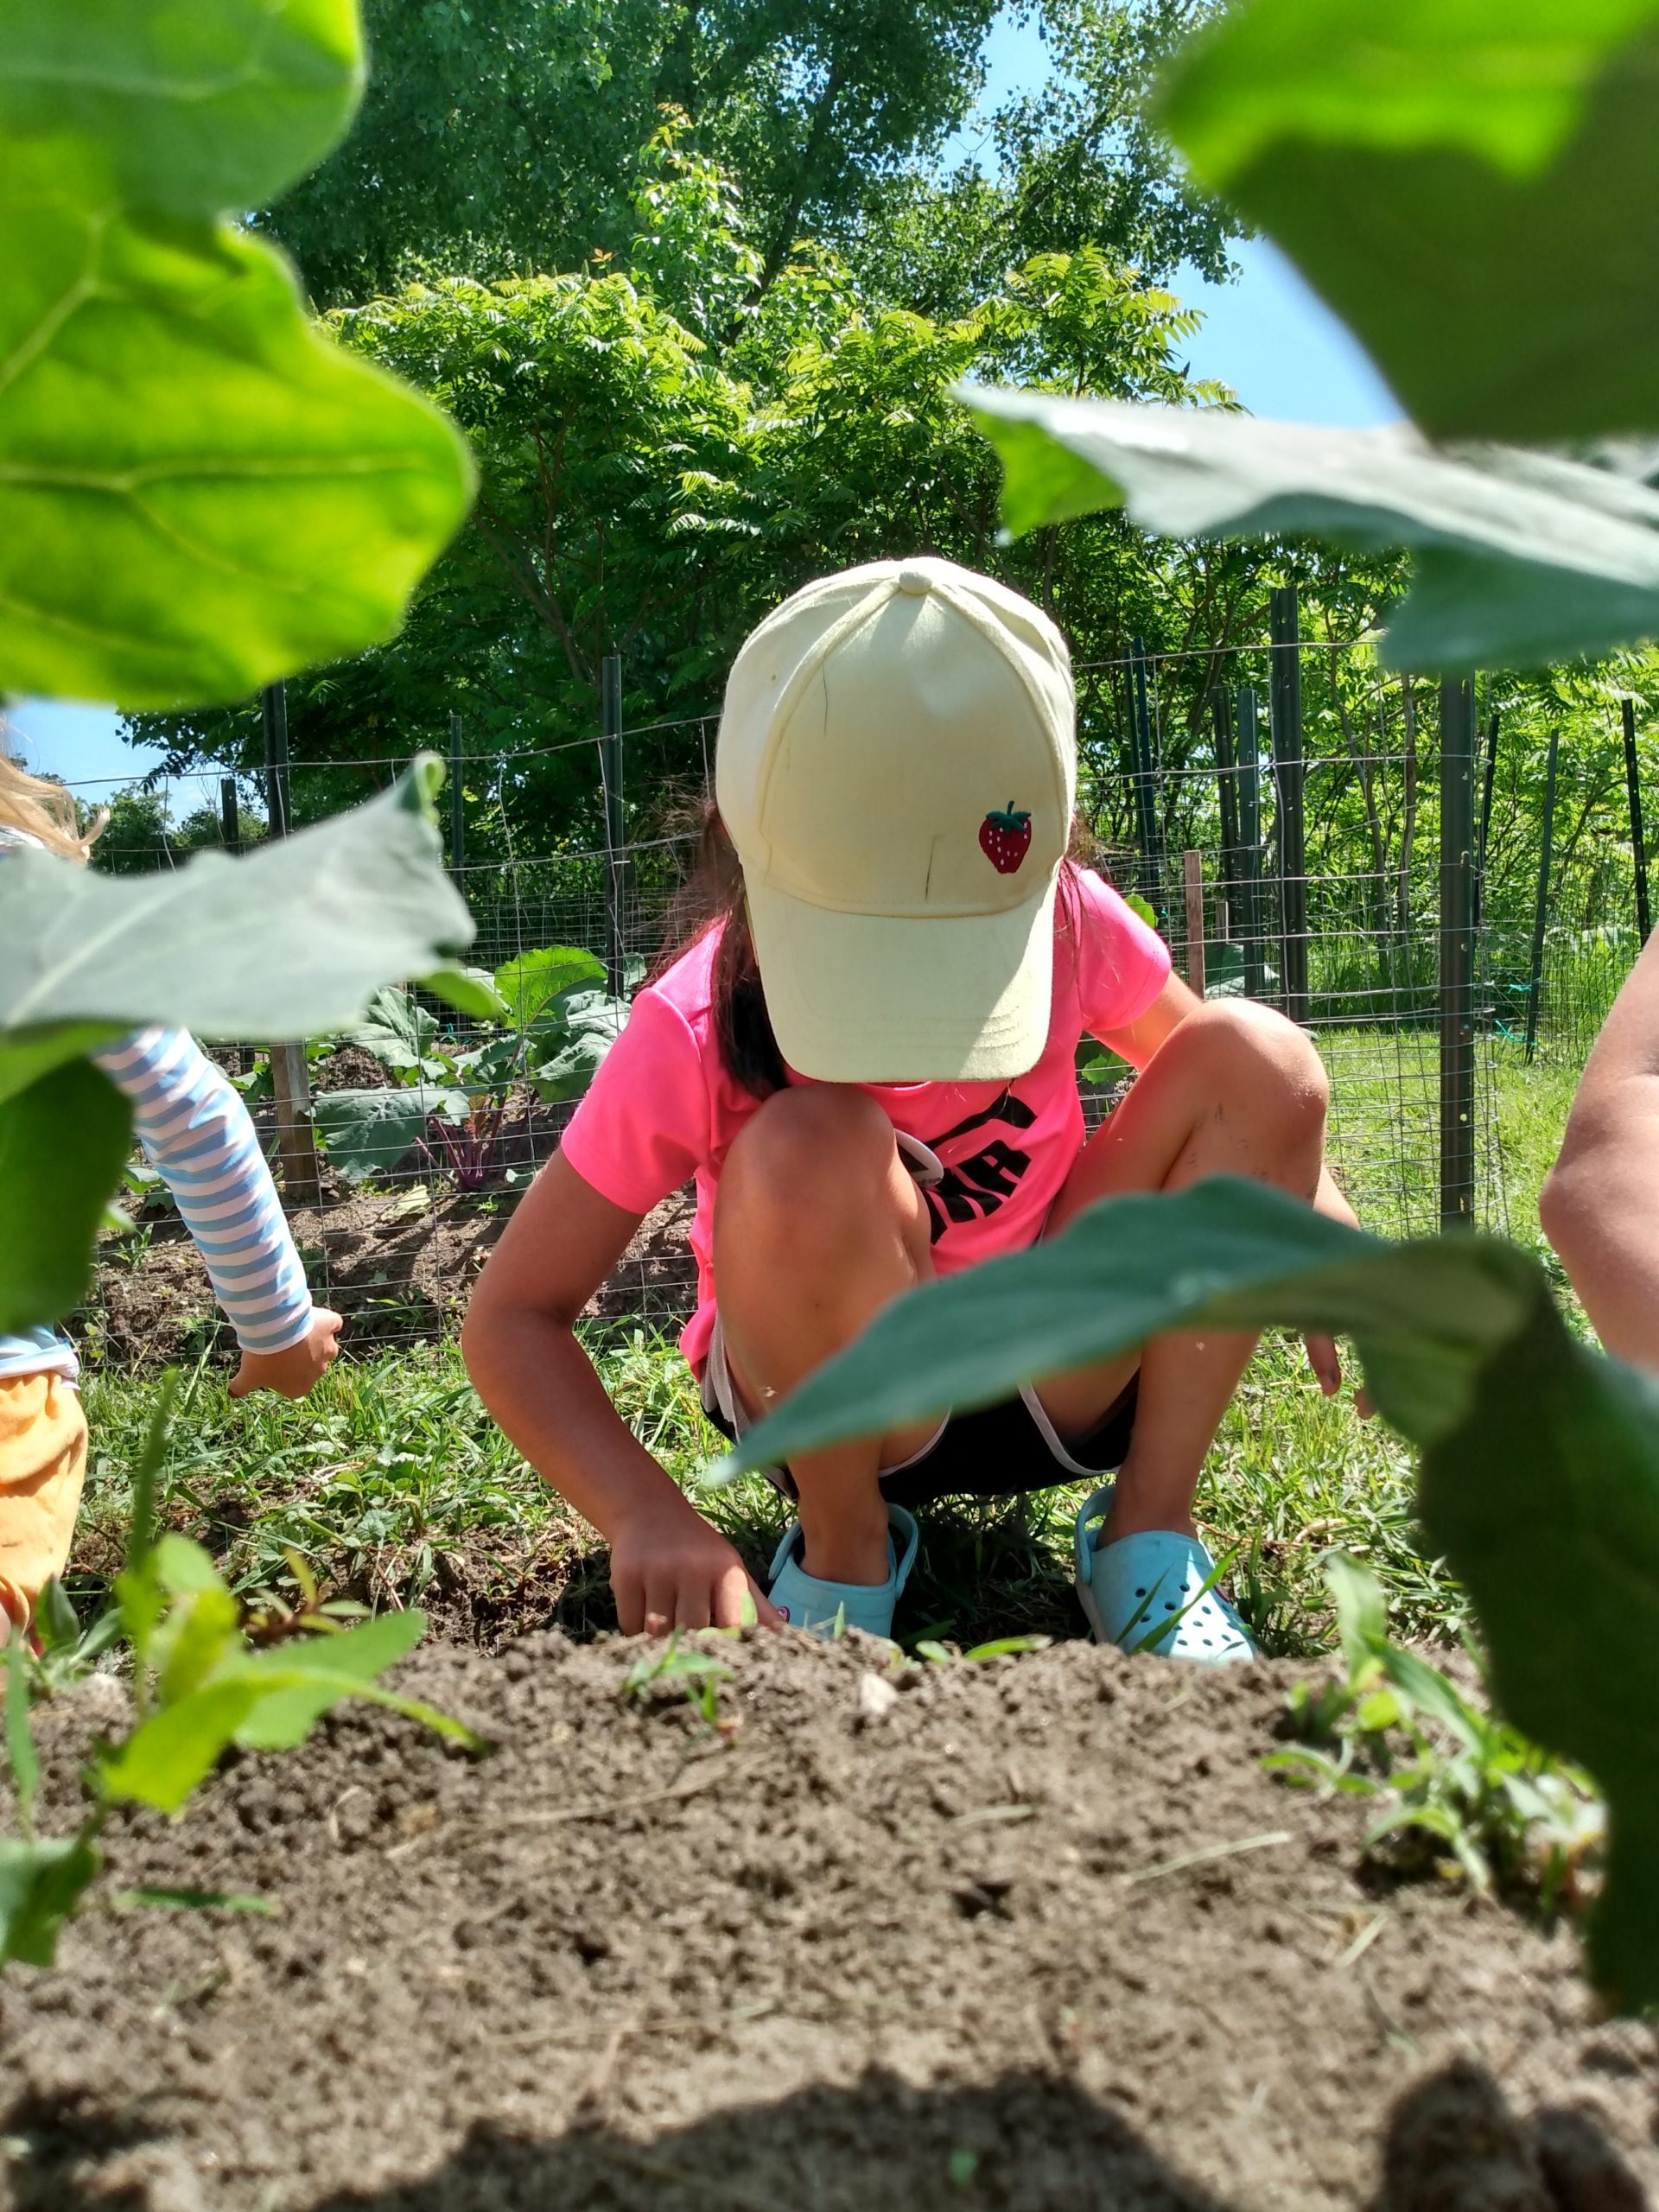 a young child wearing a baseball hat in a garden digging in the dirt